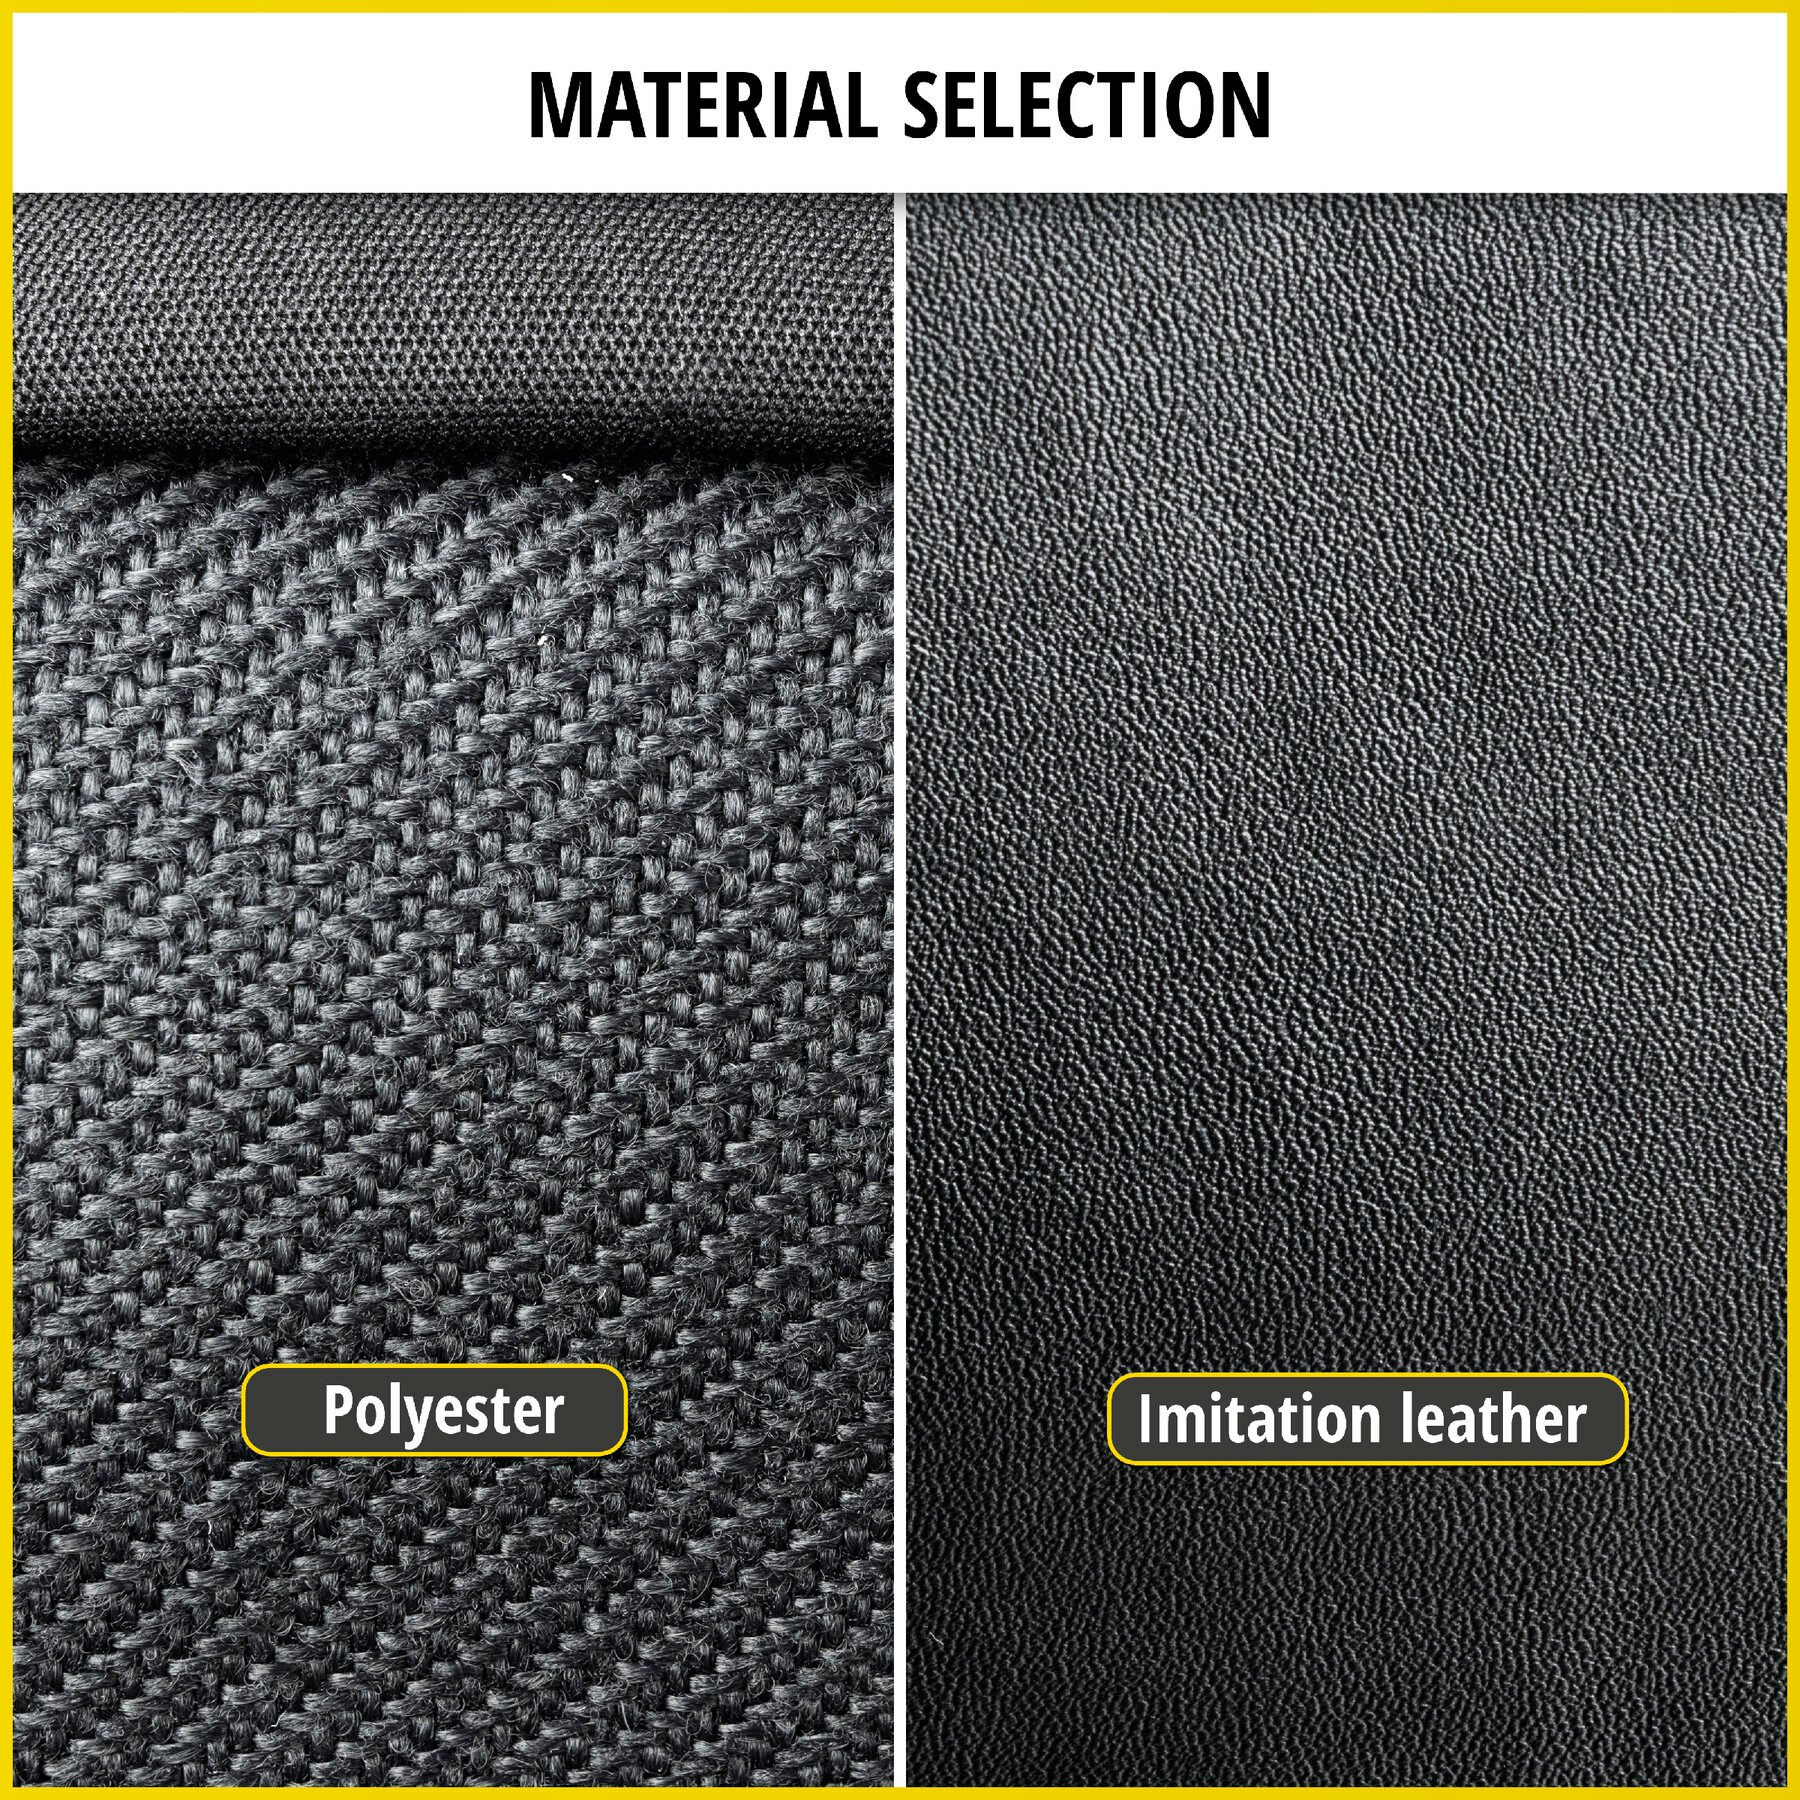 Seat cover made of imitation leather for Fiat Ducato, single seat cover, double seat cover